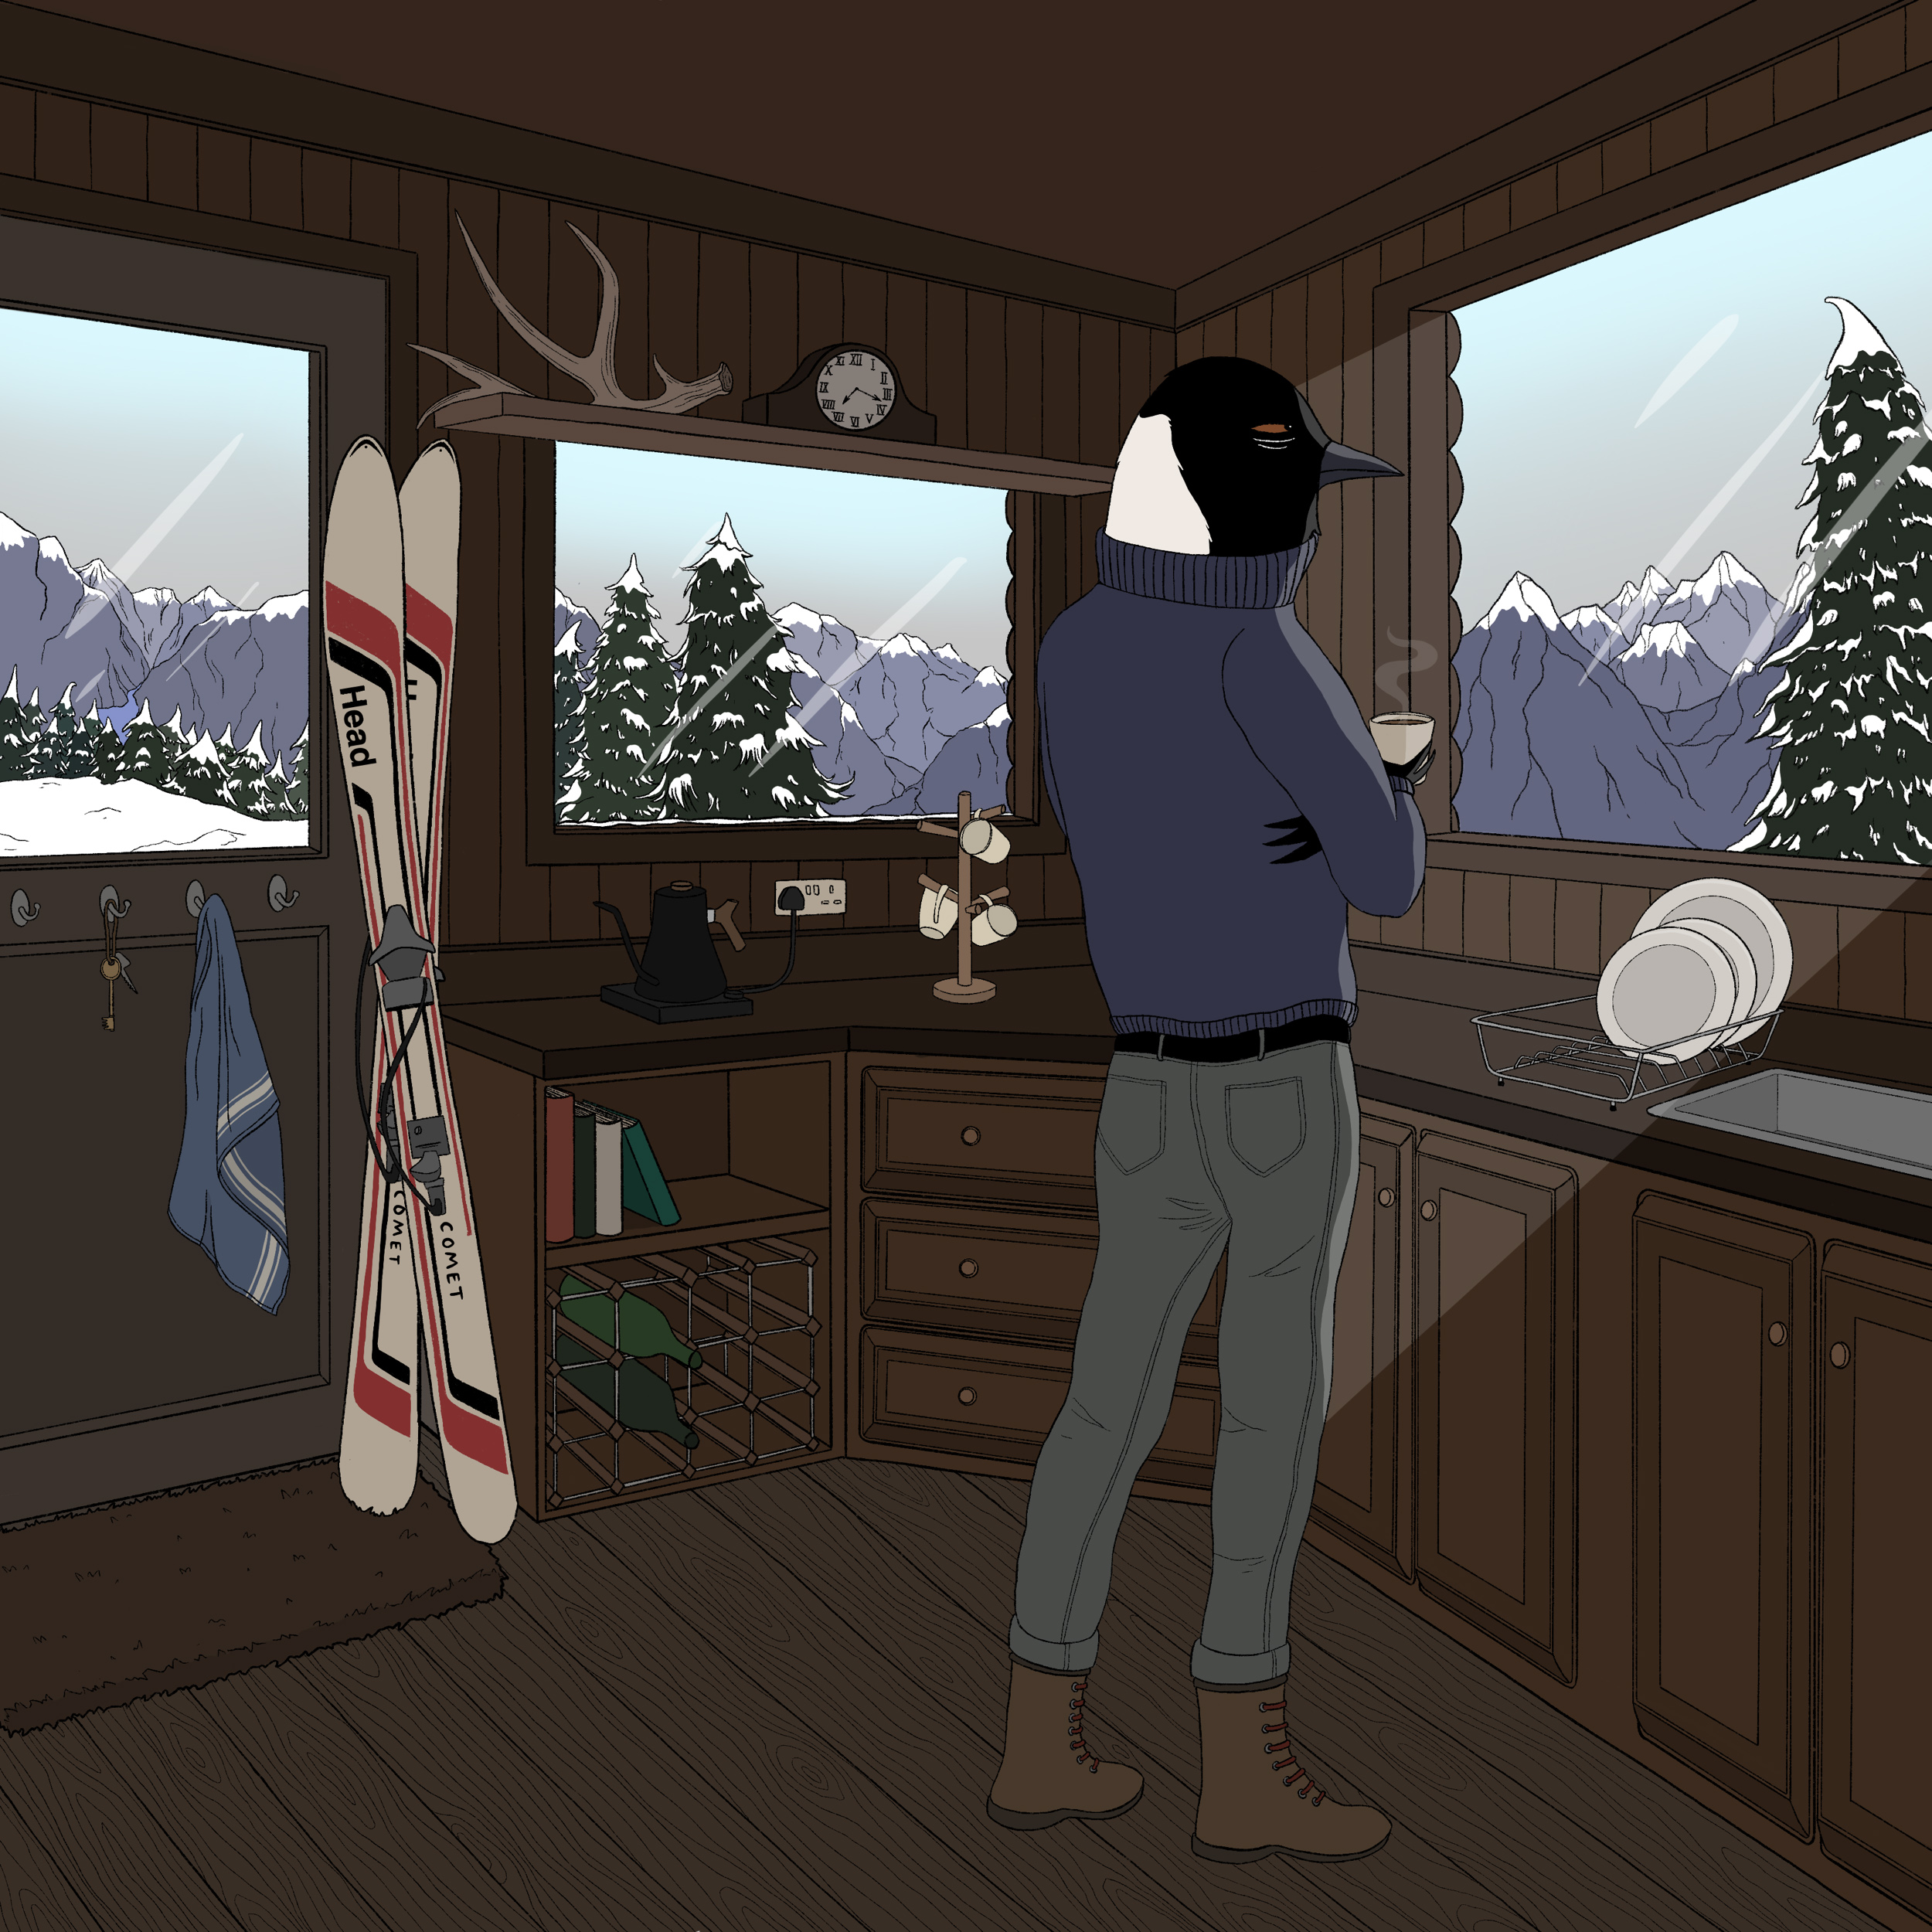 BA Illustration work by Megan Goulding-Rickards showing a magpie humanoid standing in a cabin drinking coffee. Skiis stand by the door and snow capped mountains can be seen through the windows.